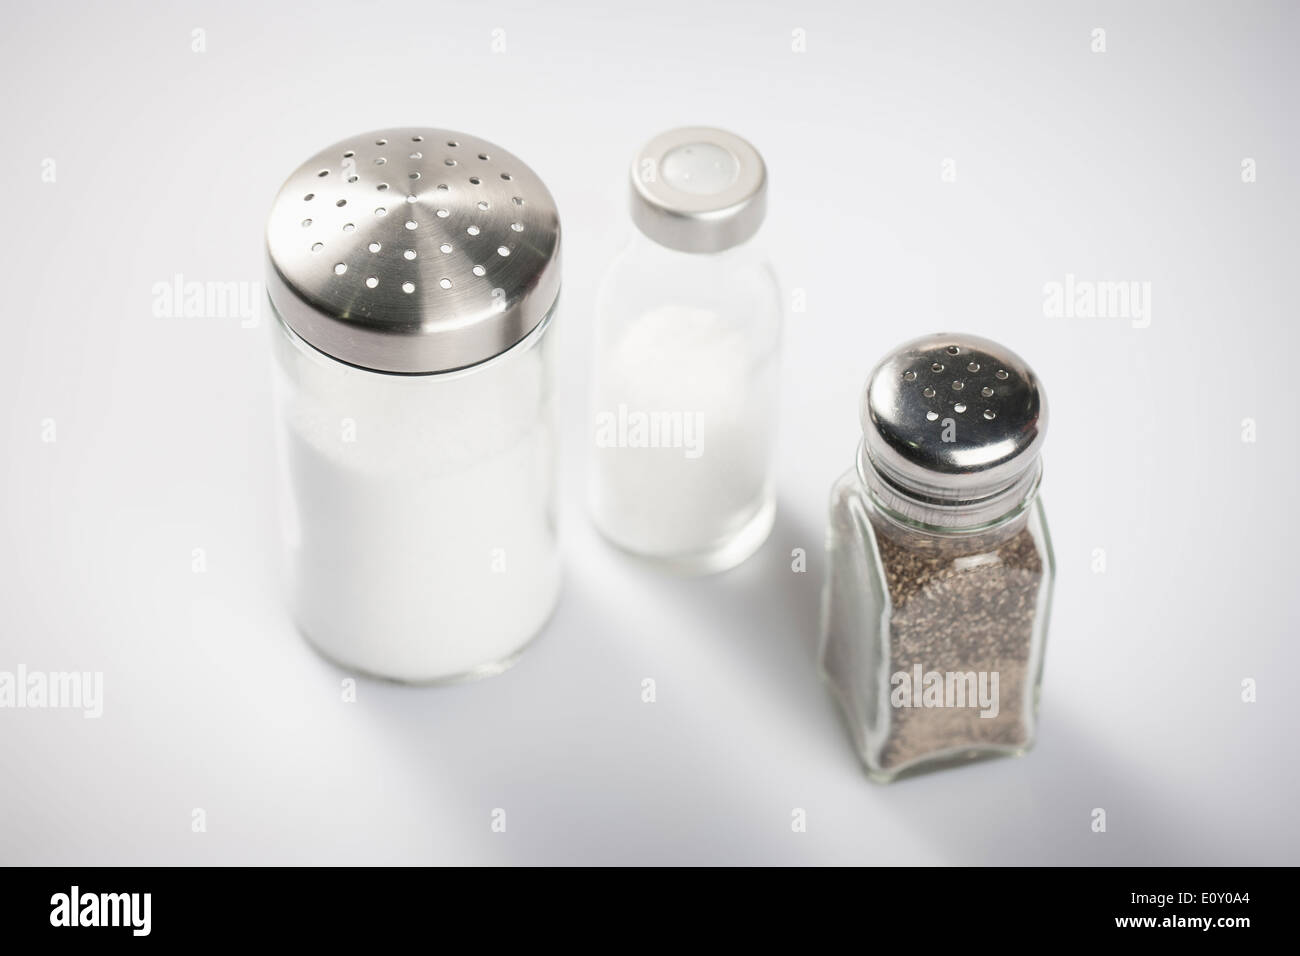 salt, pepper and sugar shakers Stock Photo